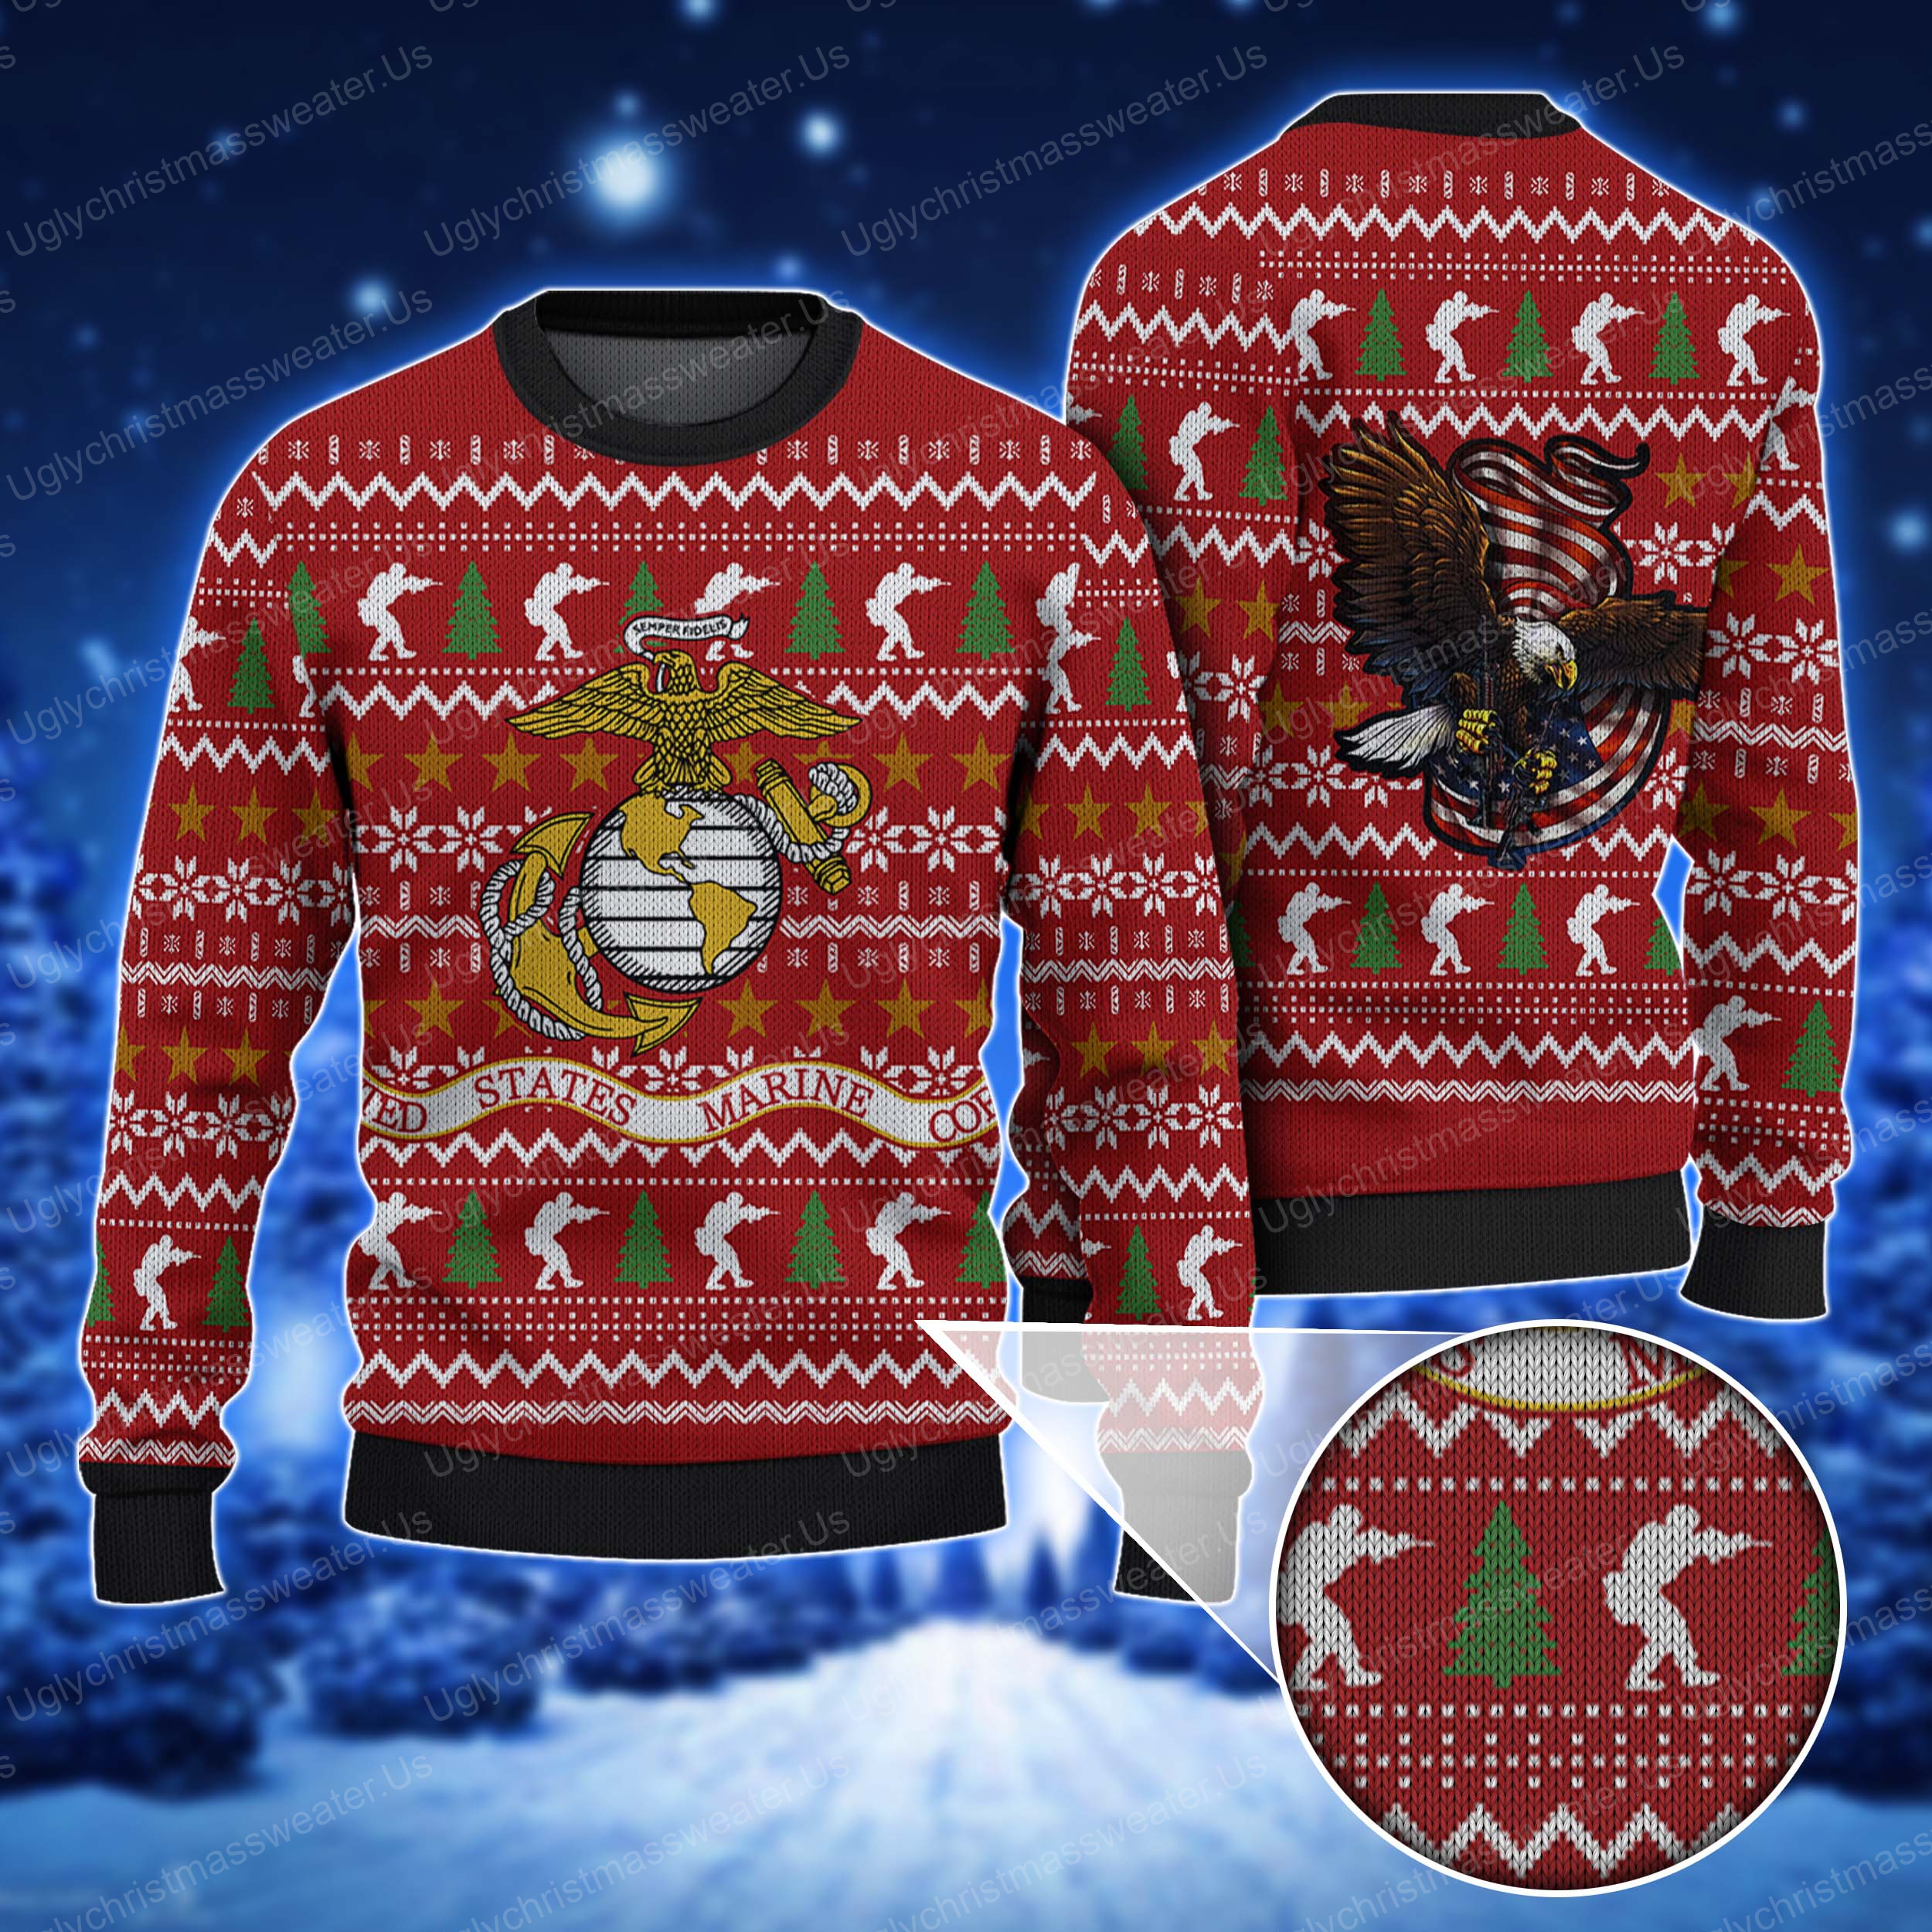 Embrace Marine Corps Pride: Eagle-Inspired Ugly Sweater In Red, White And Gold